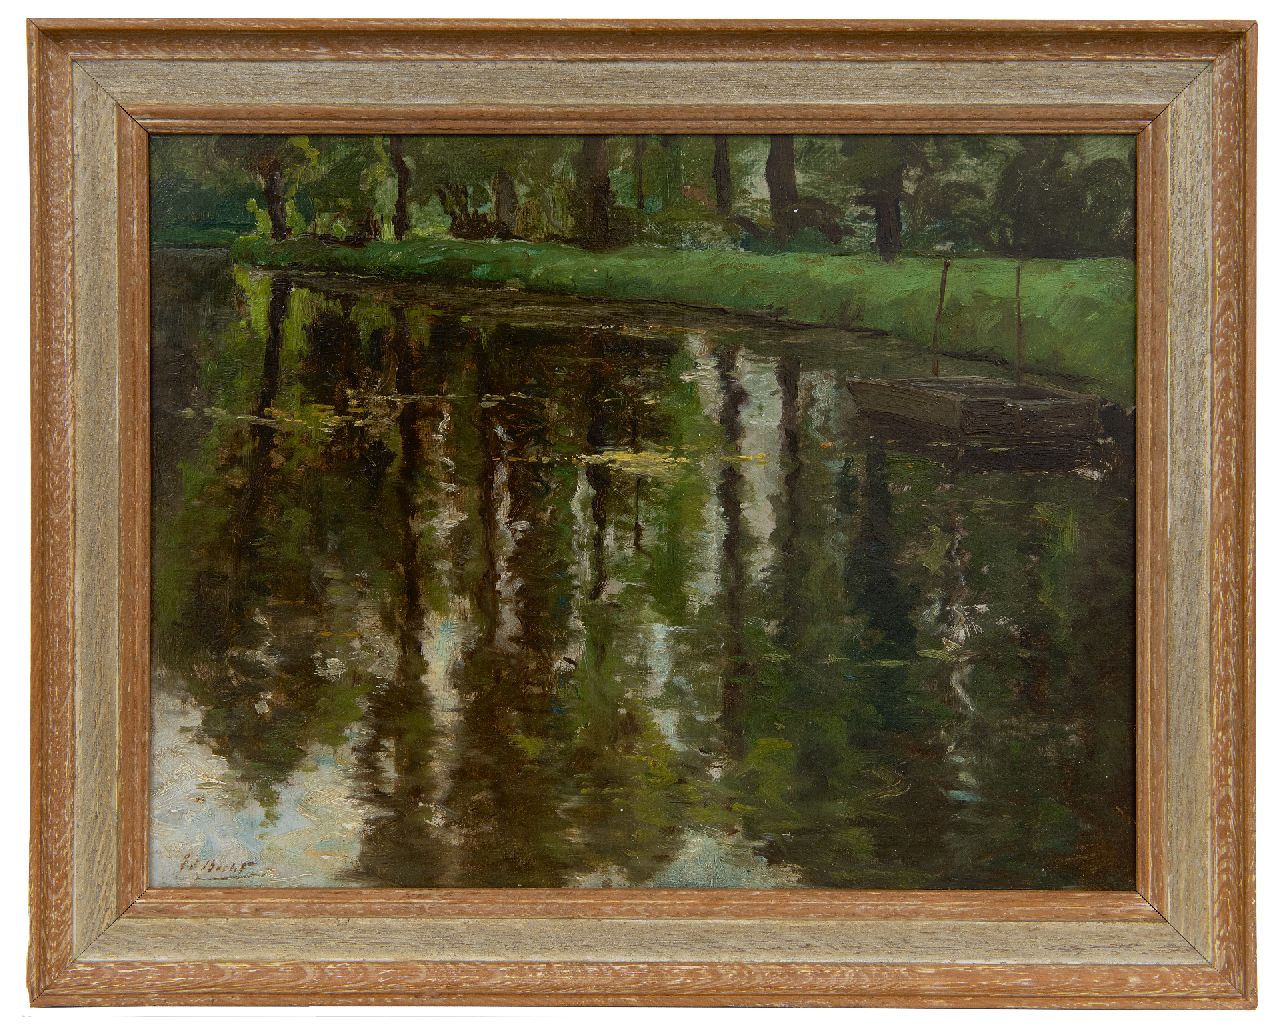 Becht E.A.  | Eduard August 'Ed' Becht | Paintings offered for sale | Pond in the Haagse Bos, The Hague, oil on board laid down on panel 27.0 x 35.1 cm, signed l.l. and without frame